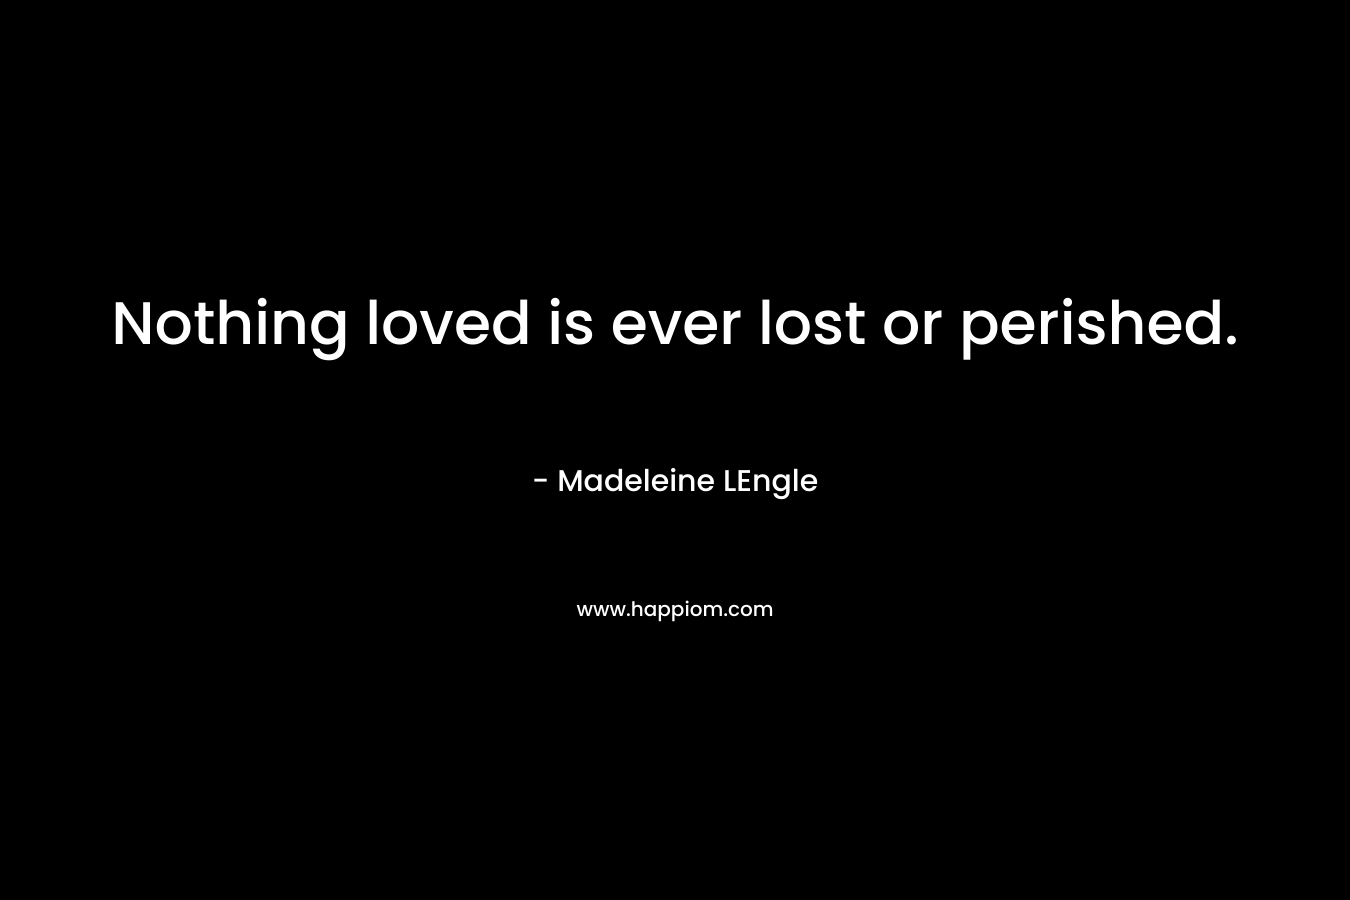 Nothing loved is ever lost or perished.